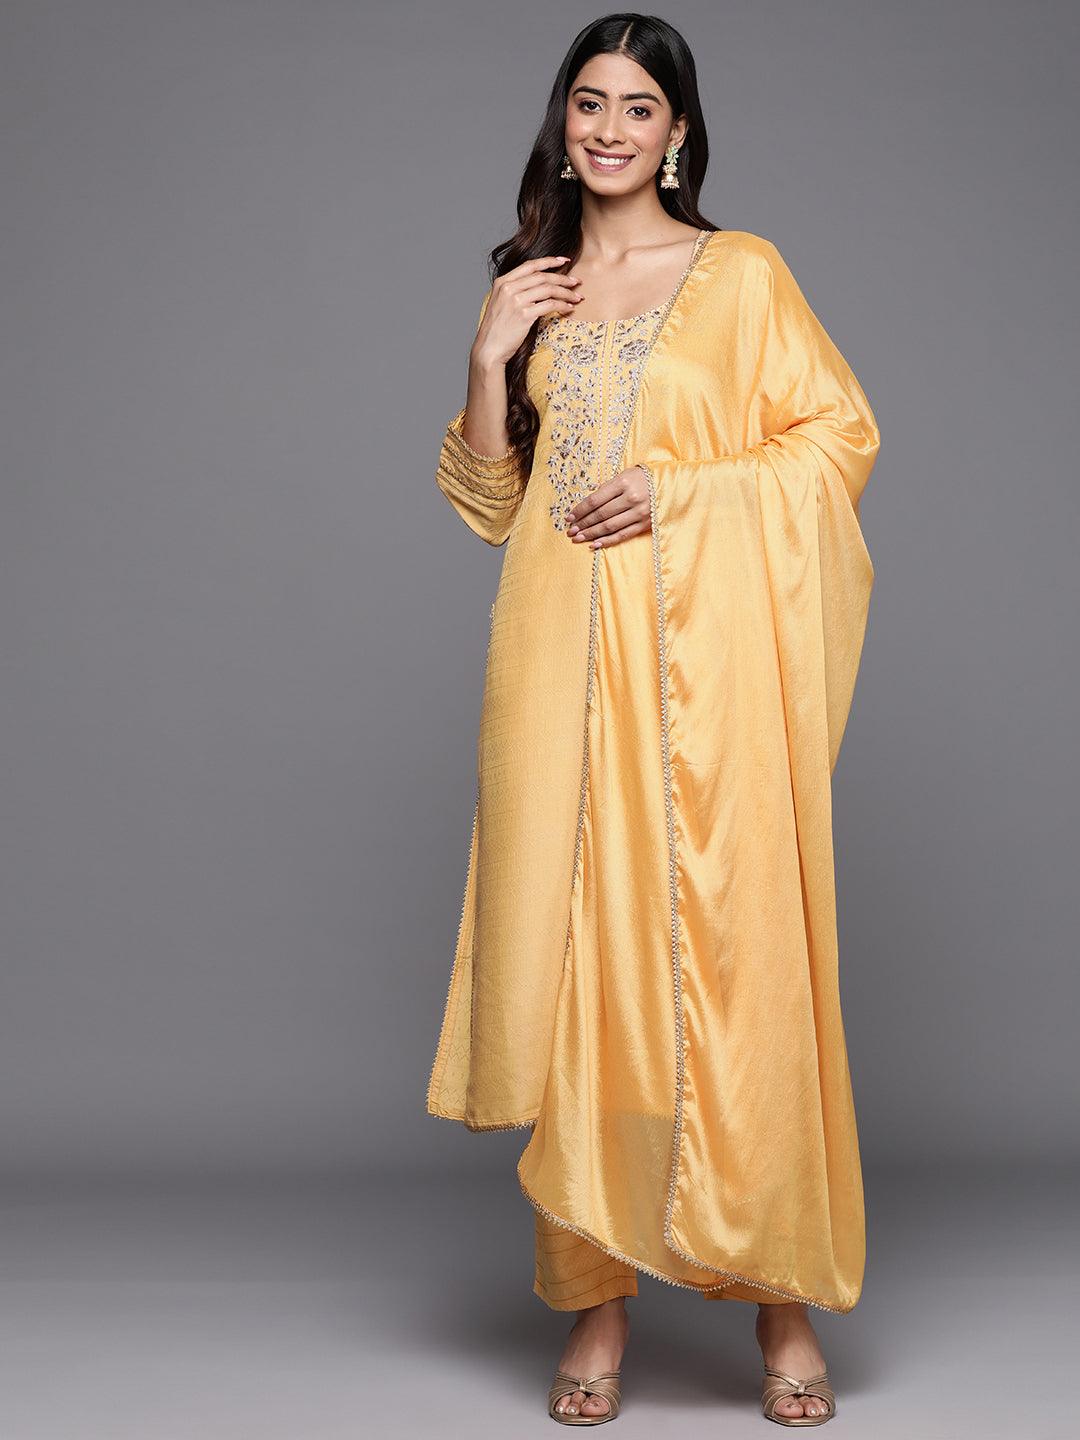 Yellow Yoke Design Silk Blend Straight Suit Set With Trousers - Libas